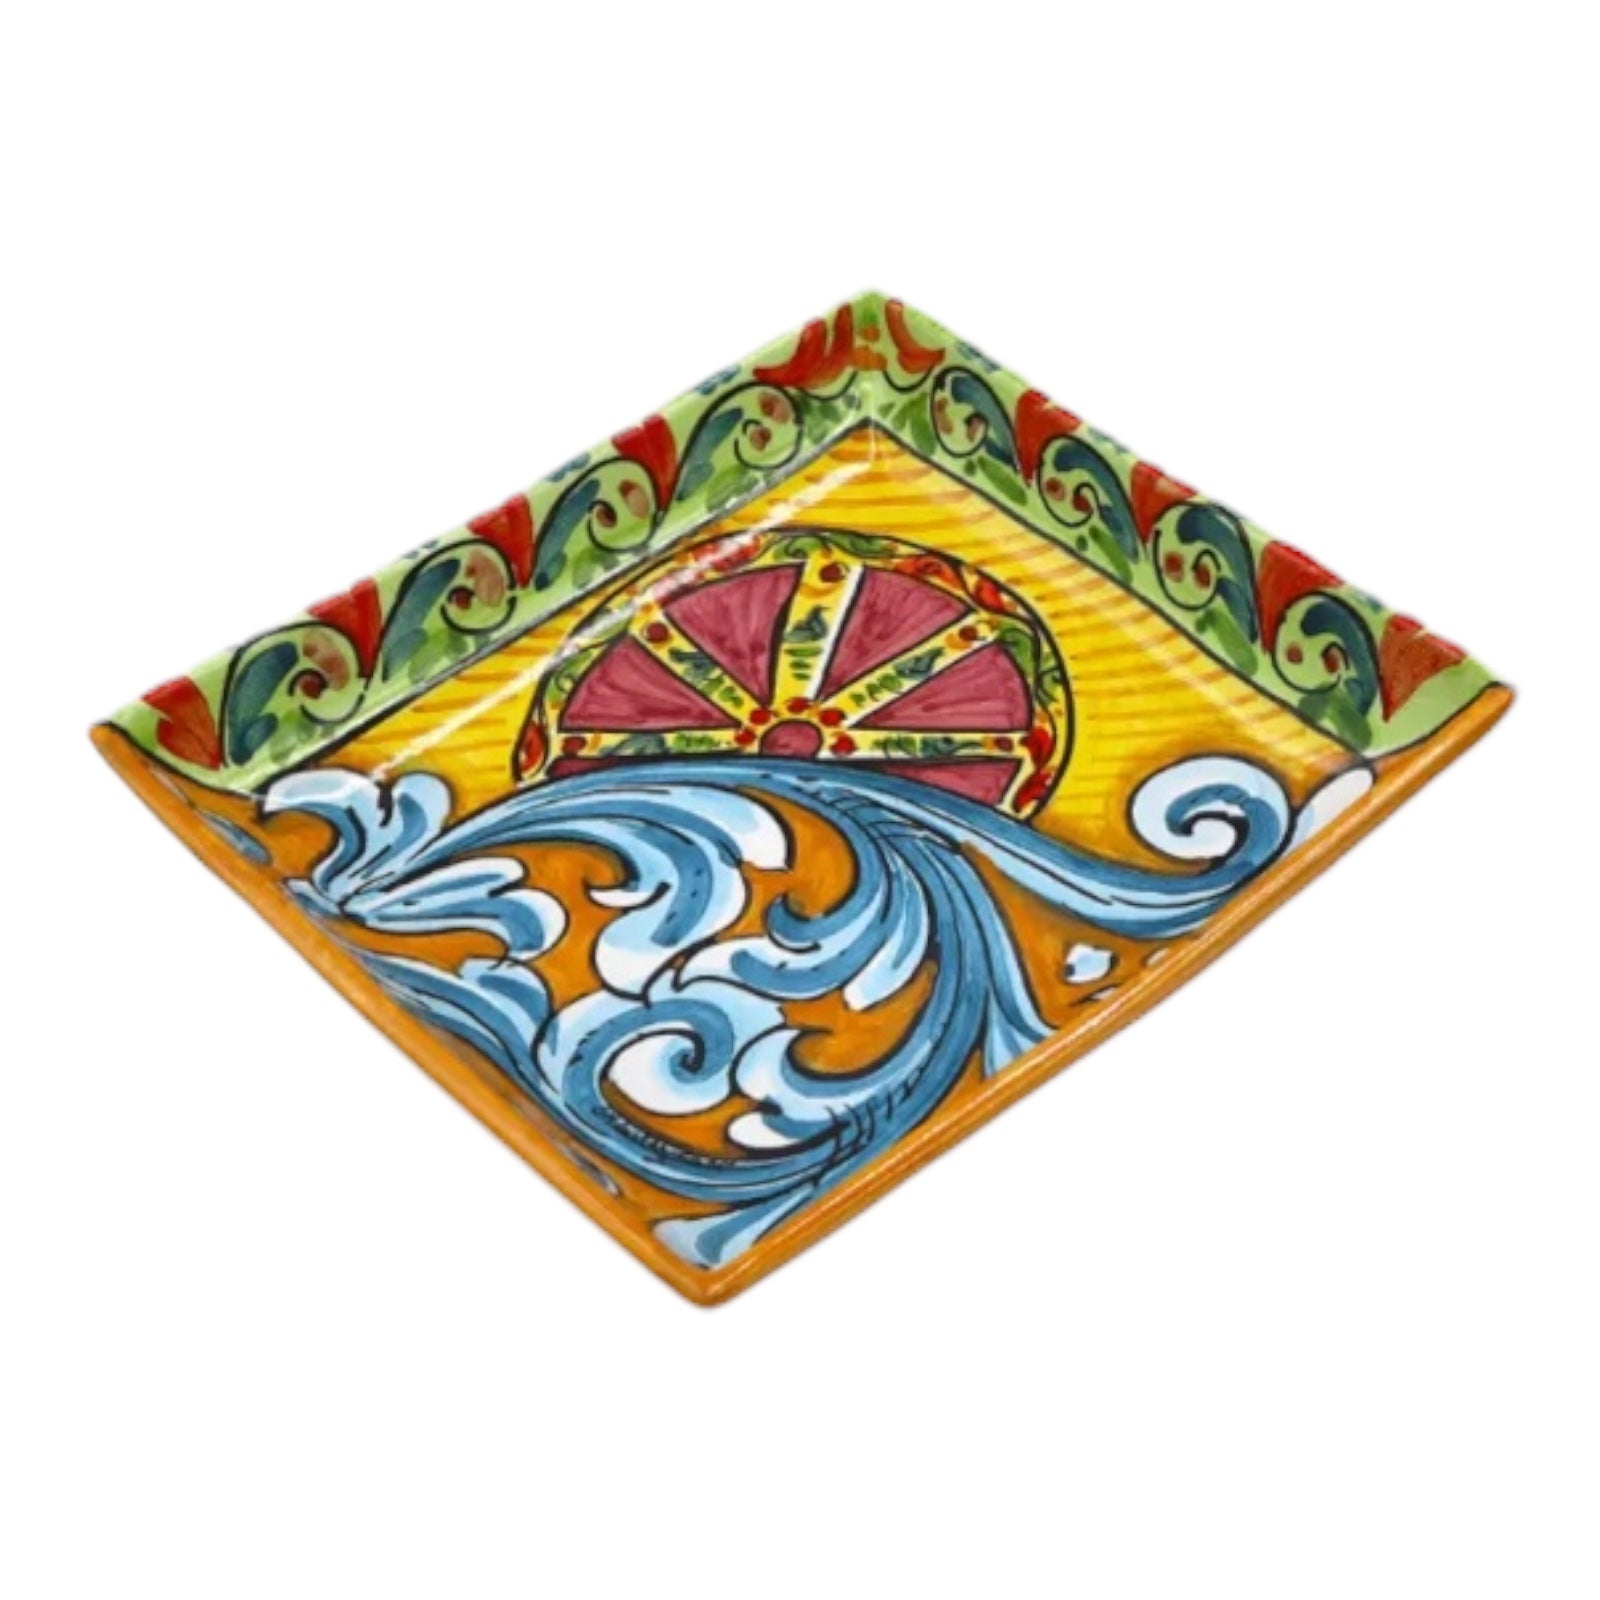 Pocket Emptier Bowl In Caltagirone Ceramic , Sicily-themed decoration, l 20 x 20 cm approx.